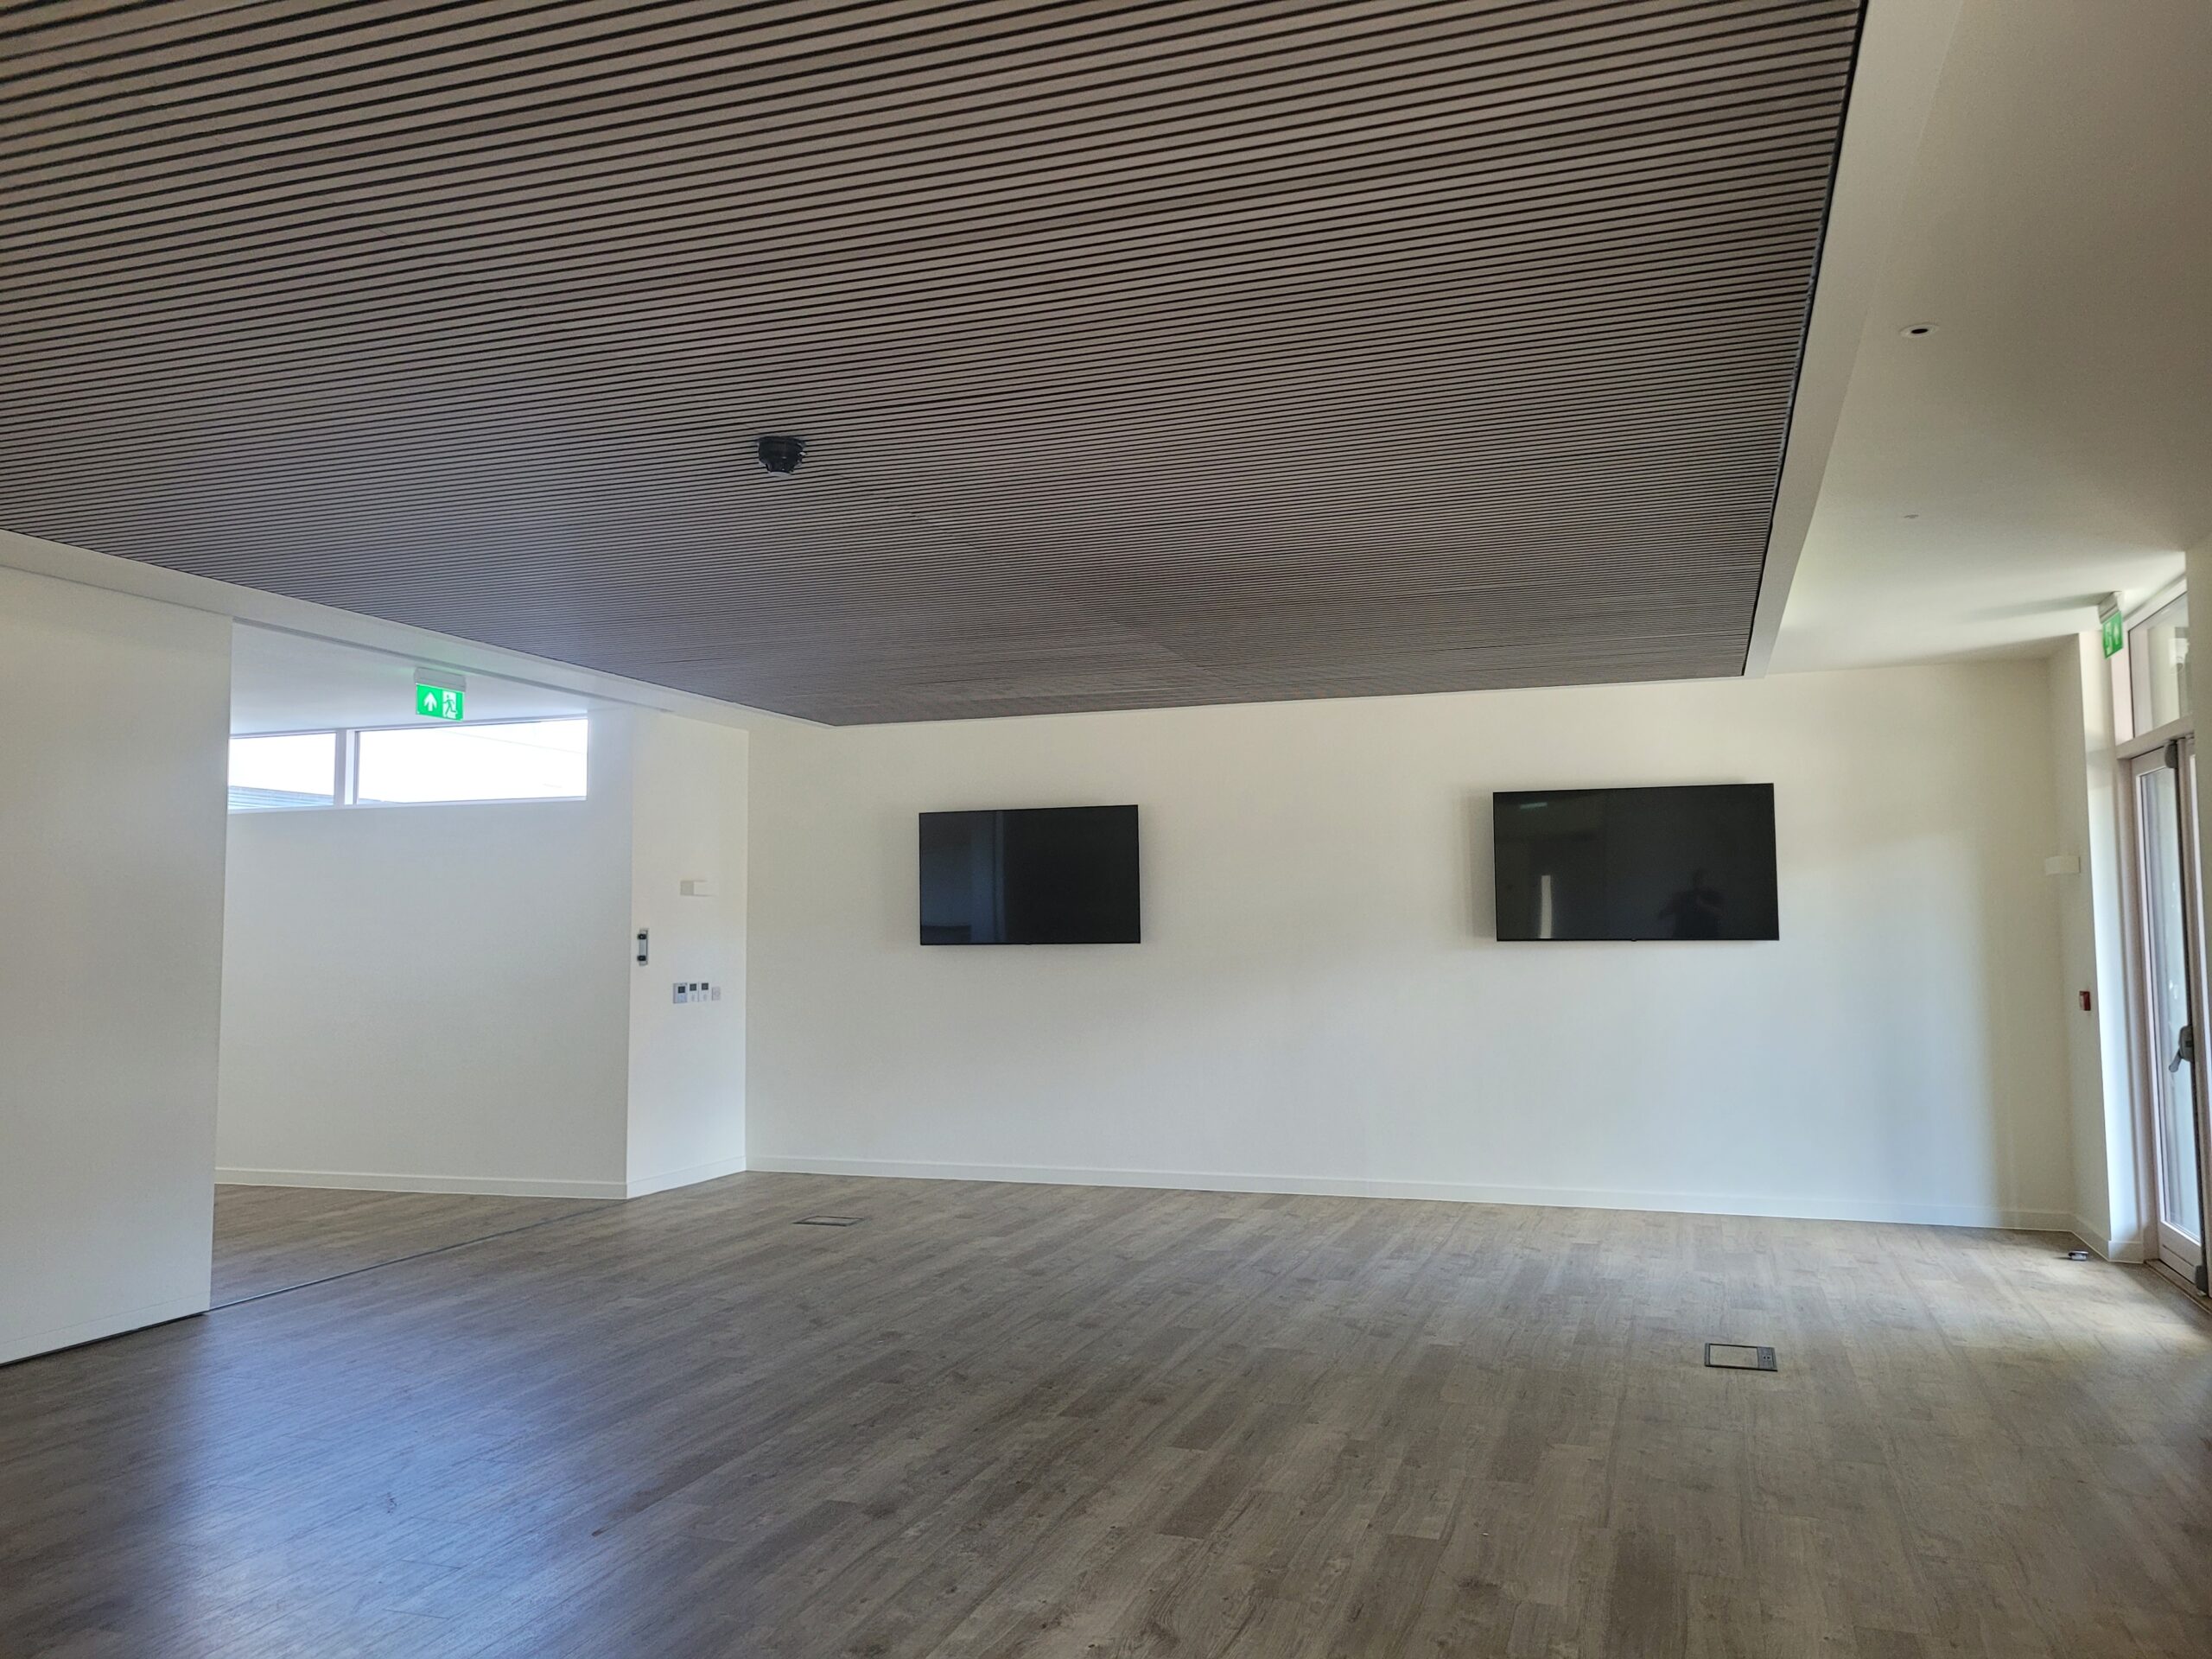 A new acoustic suspended ceiling in an empty room.